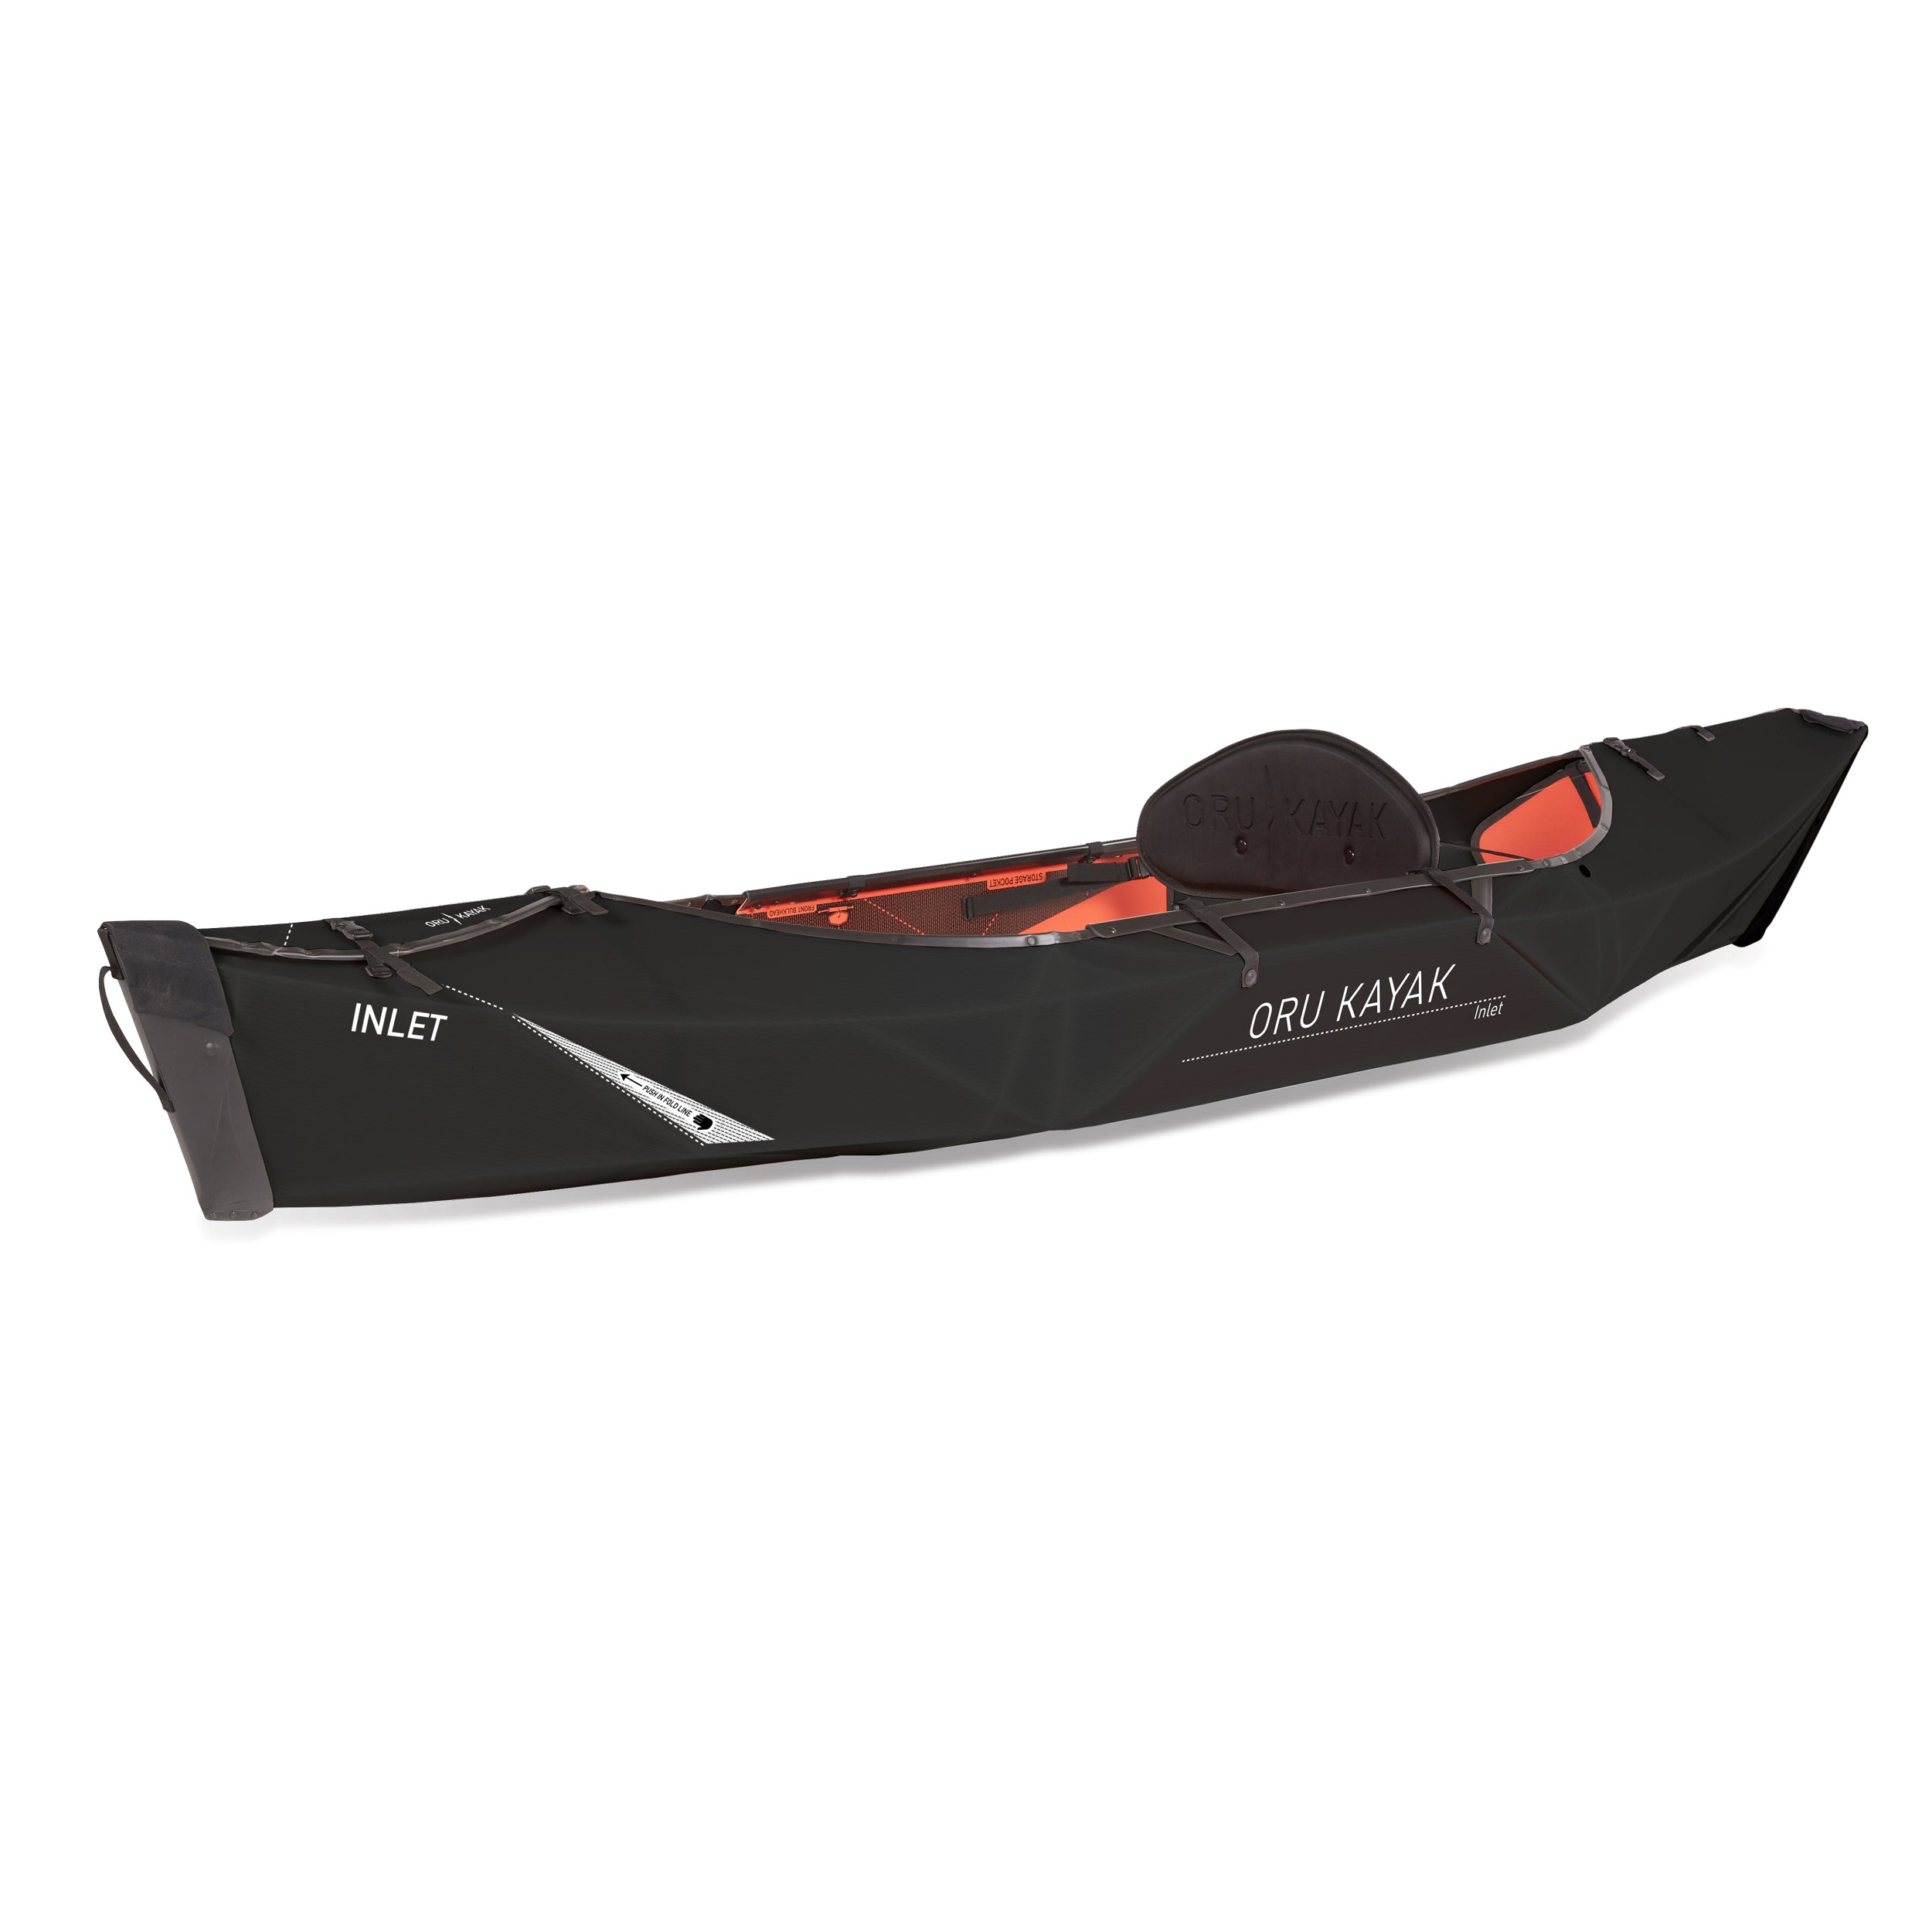 Inlet black edition kayak side angle view